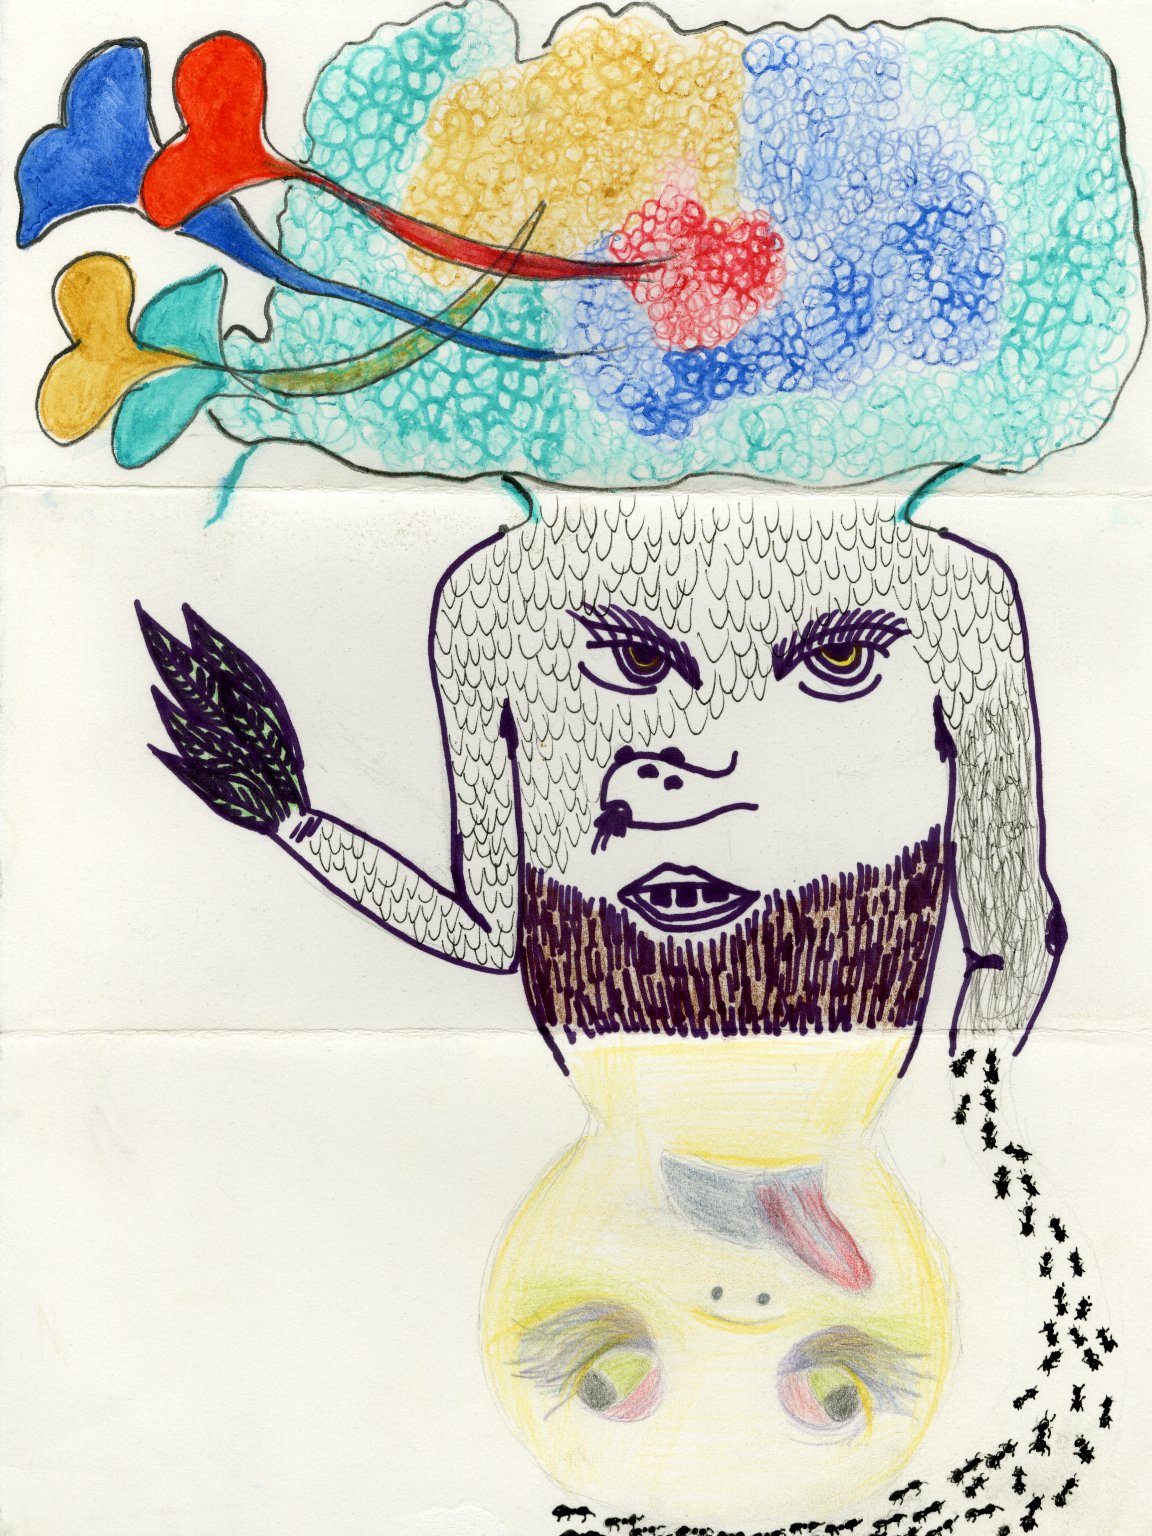 Exquisite Corpses, from Kim Dickey's 2009 Seminar on the Grotesque